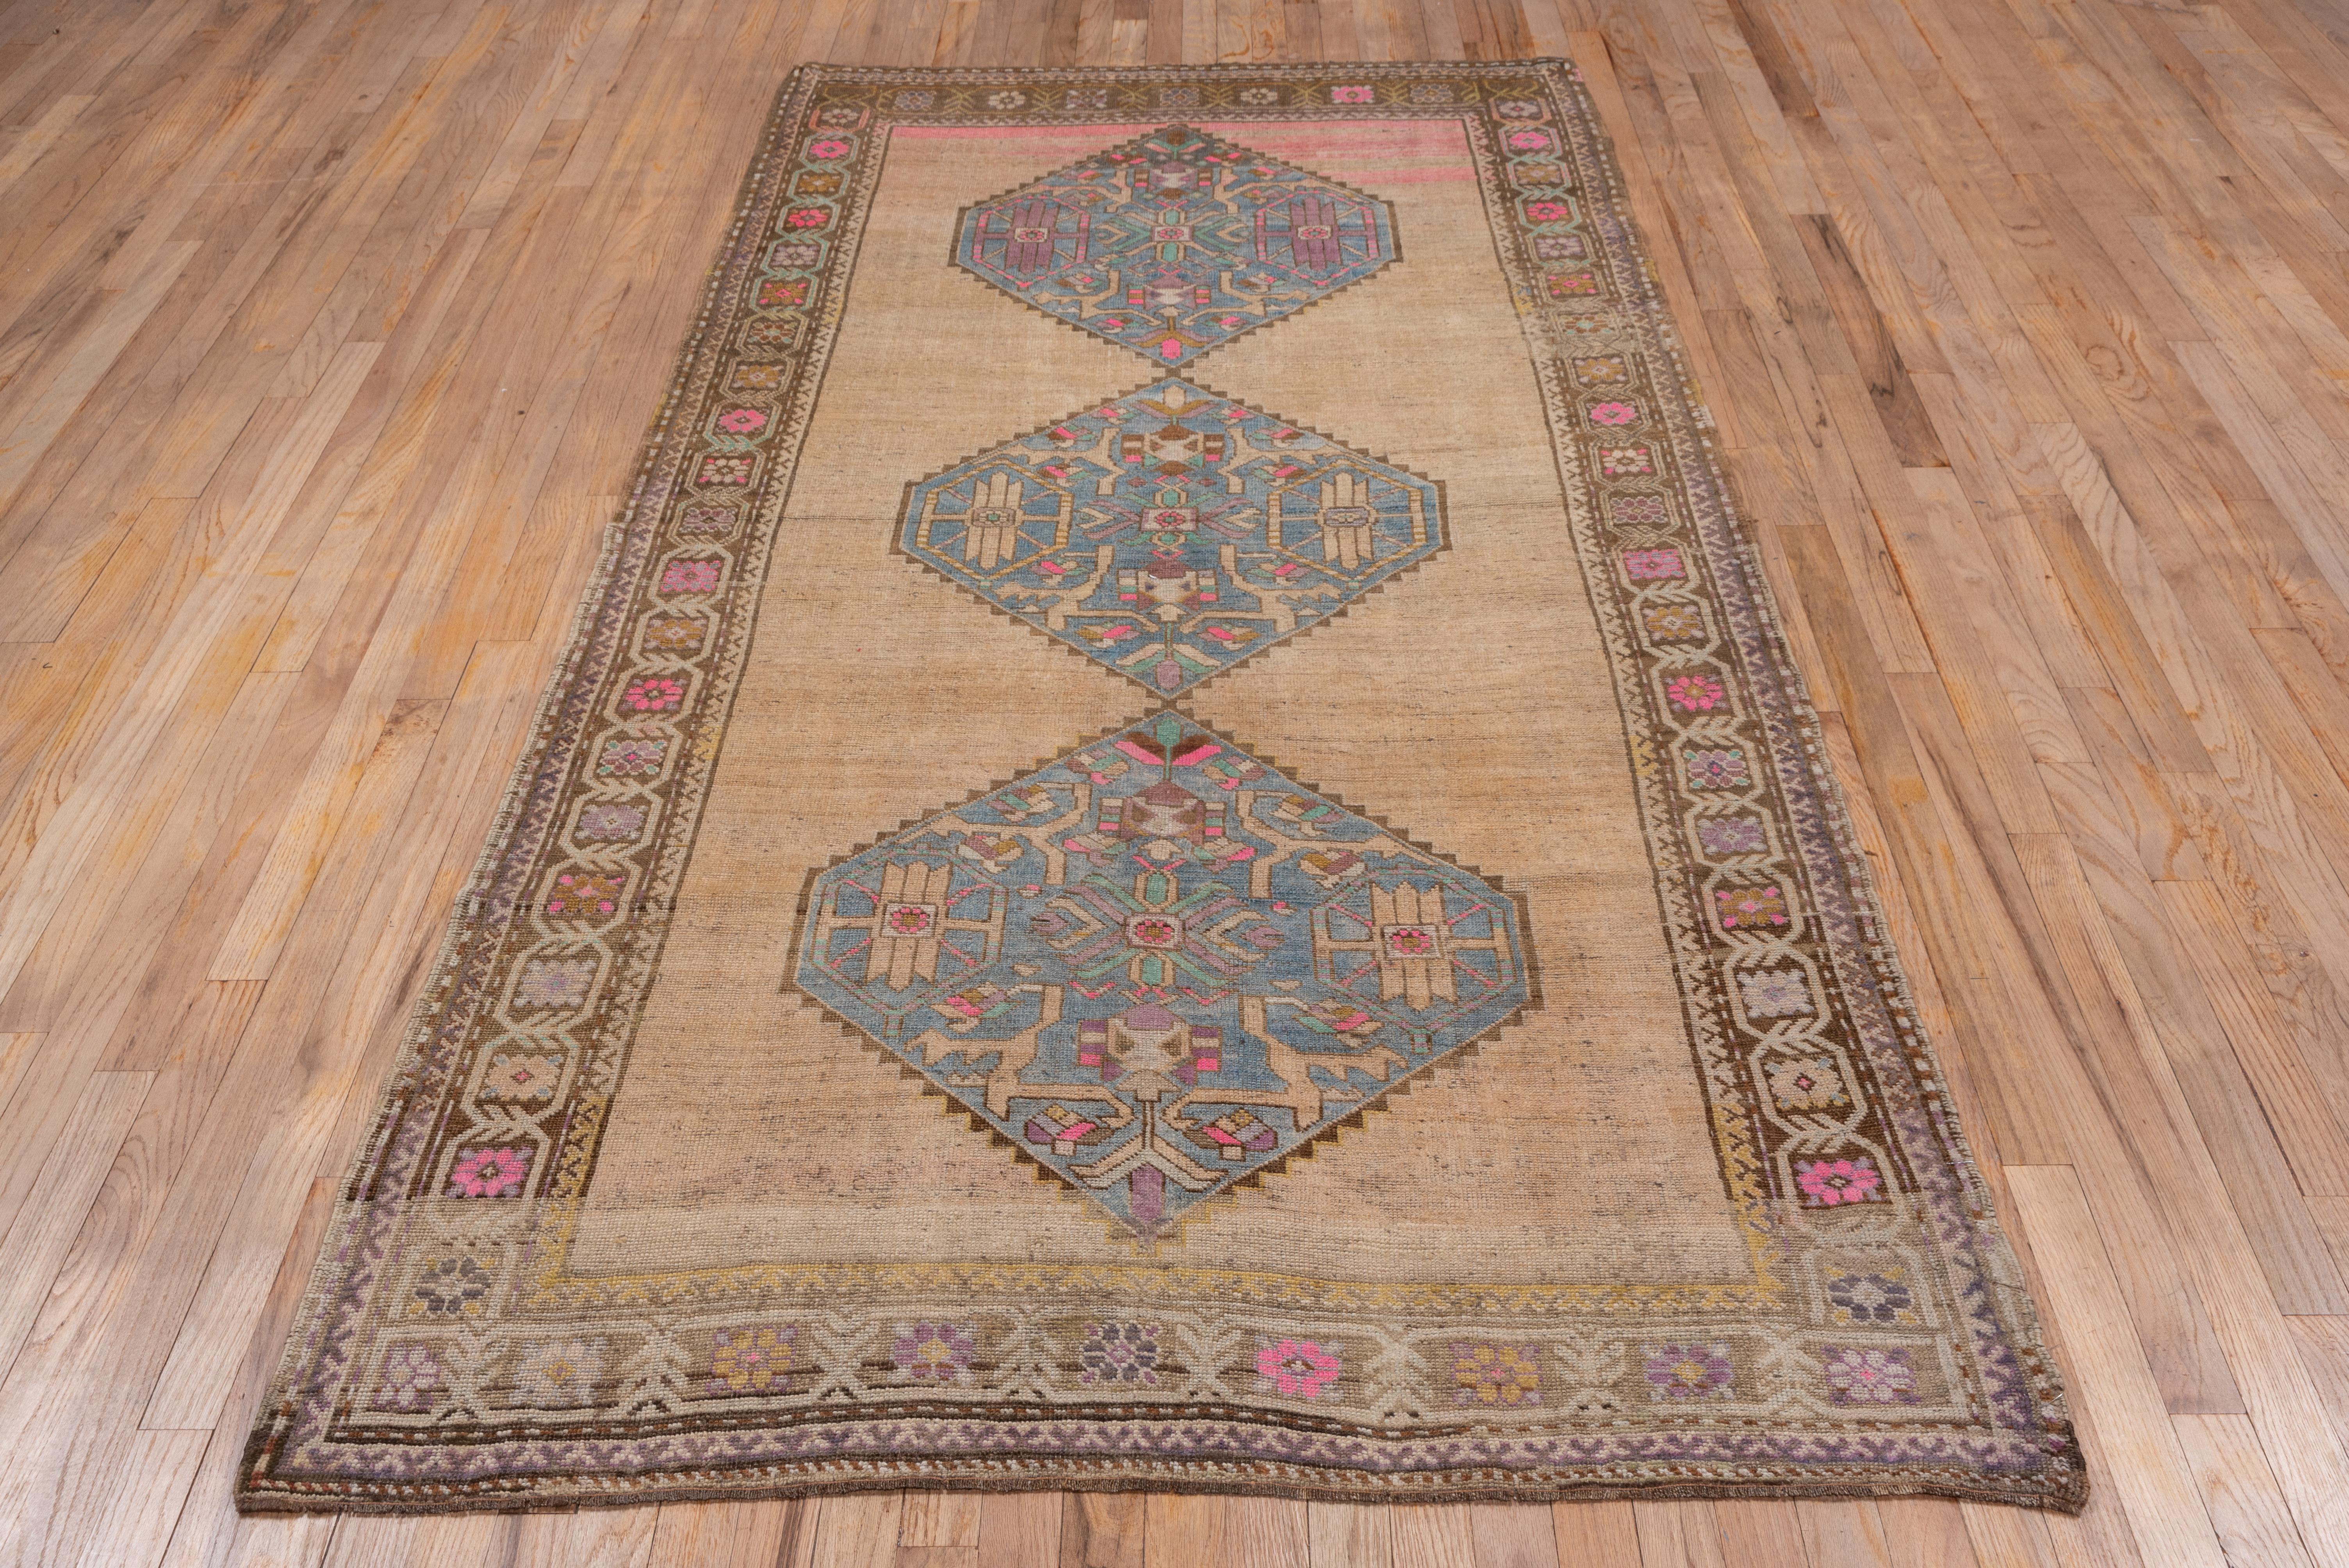 Hand-Knotted Antique Caucasian Karabagh Rug, Pink, Blue and Neutral Tones